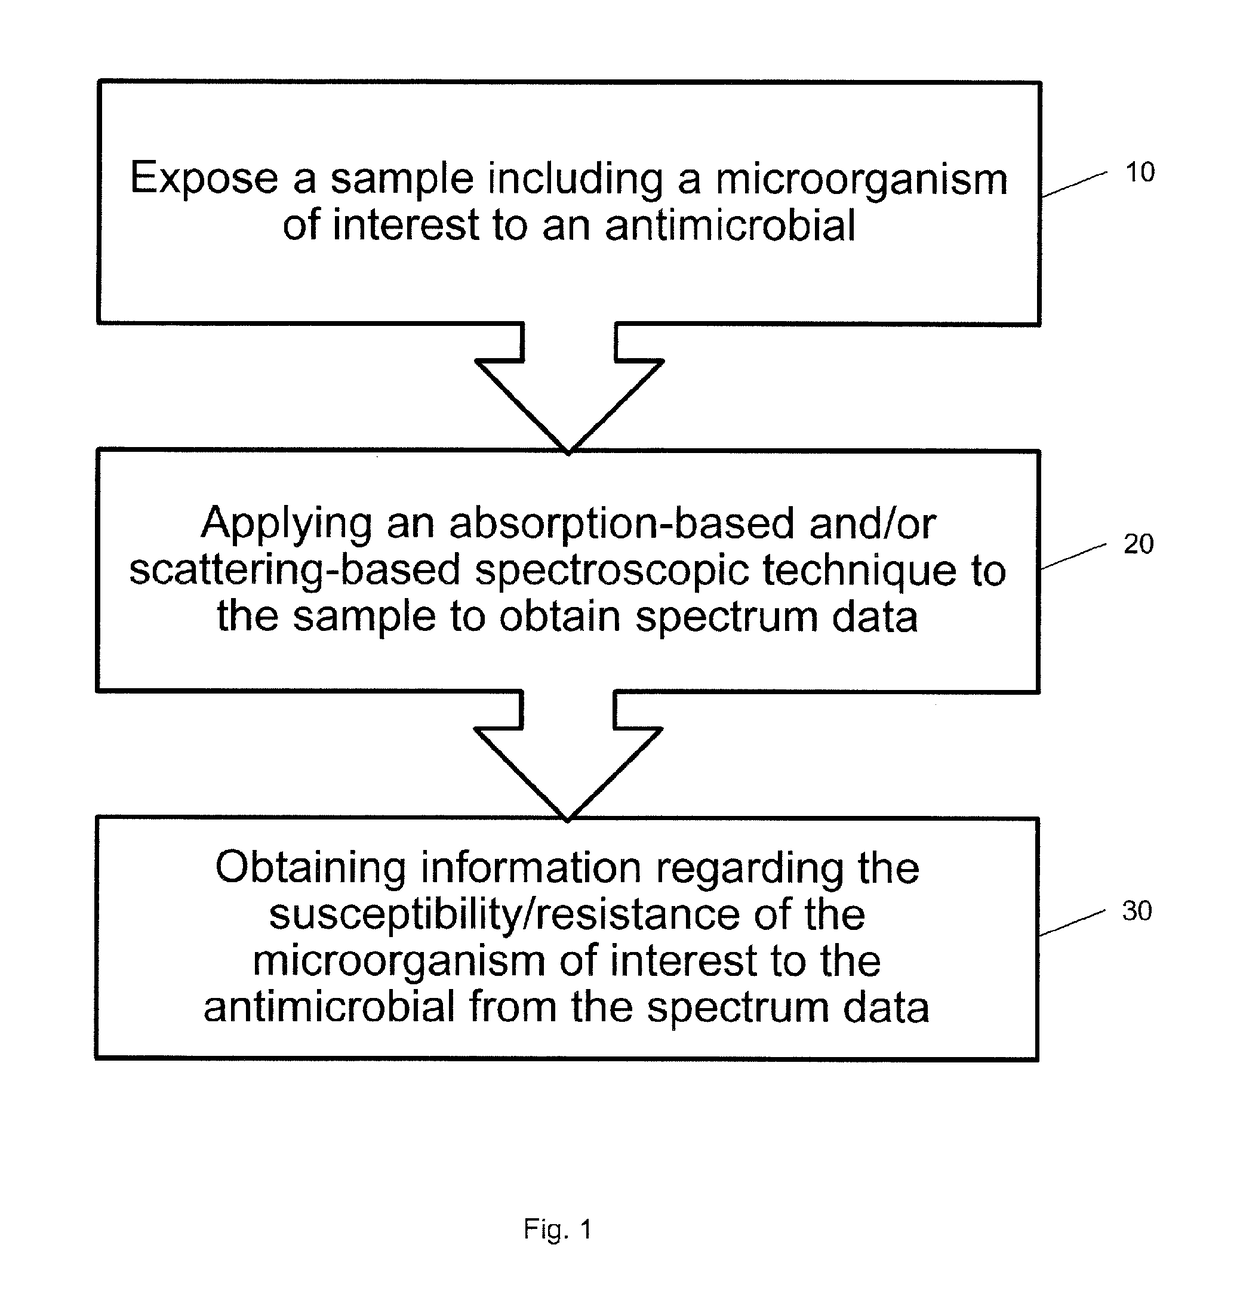 A method of analysing a sample including a microorganism of interest